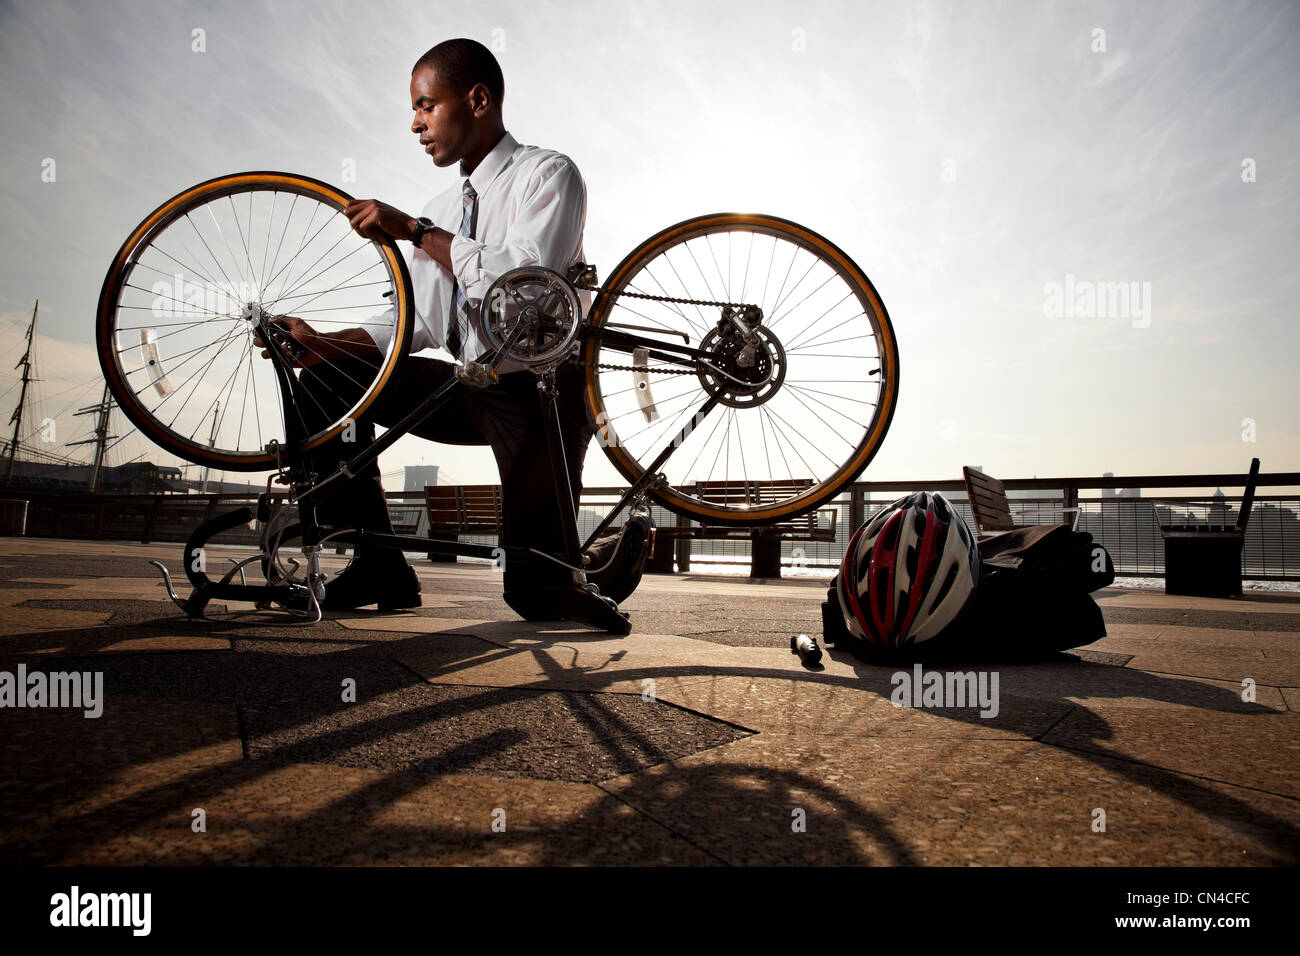 Young businessman reparing bicycle Stock Photo